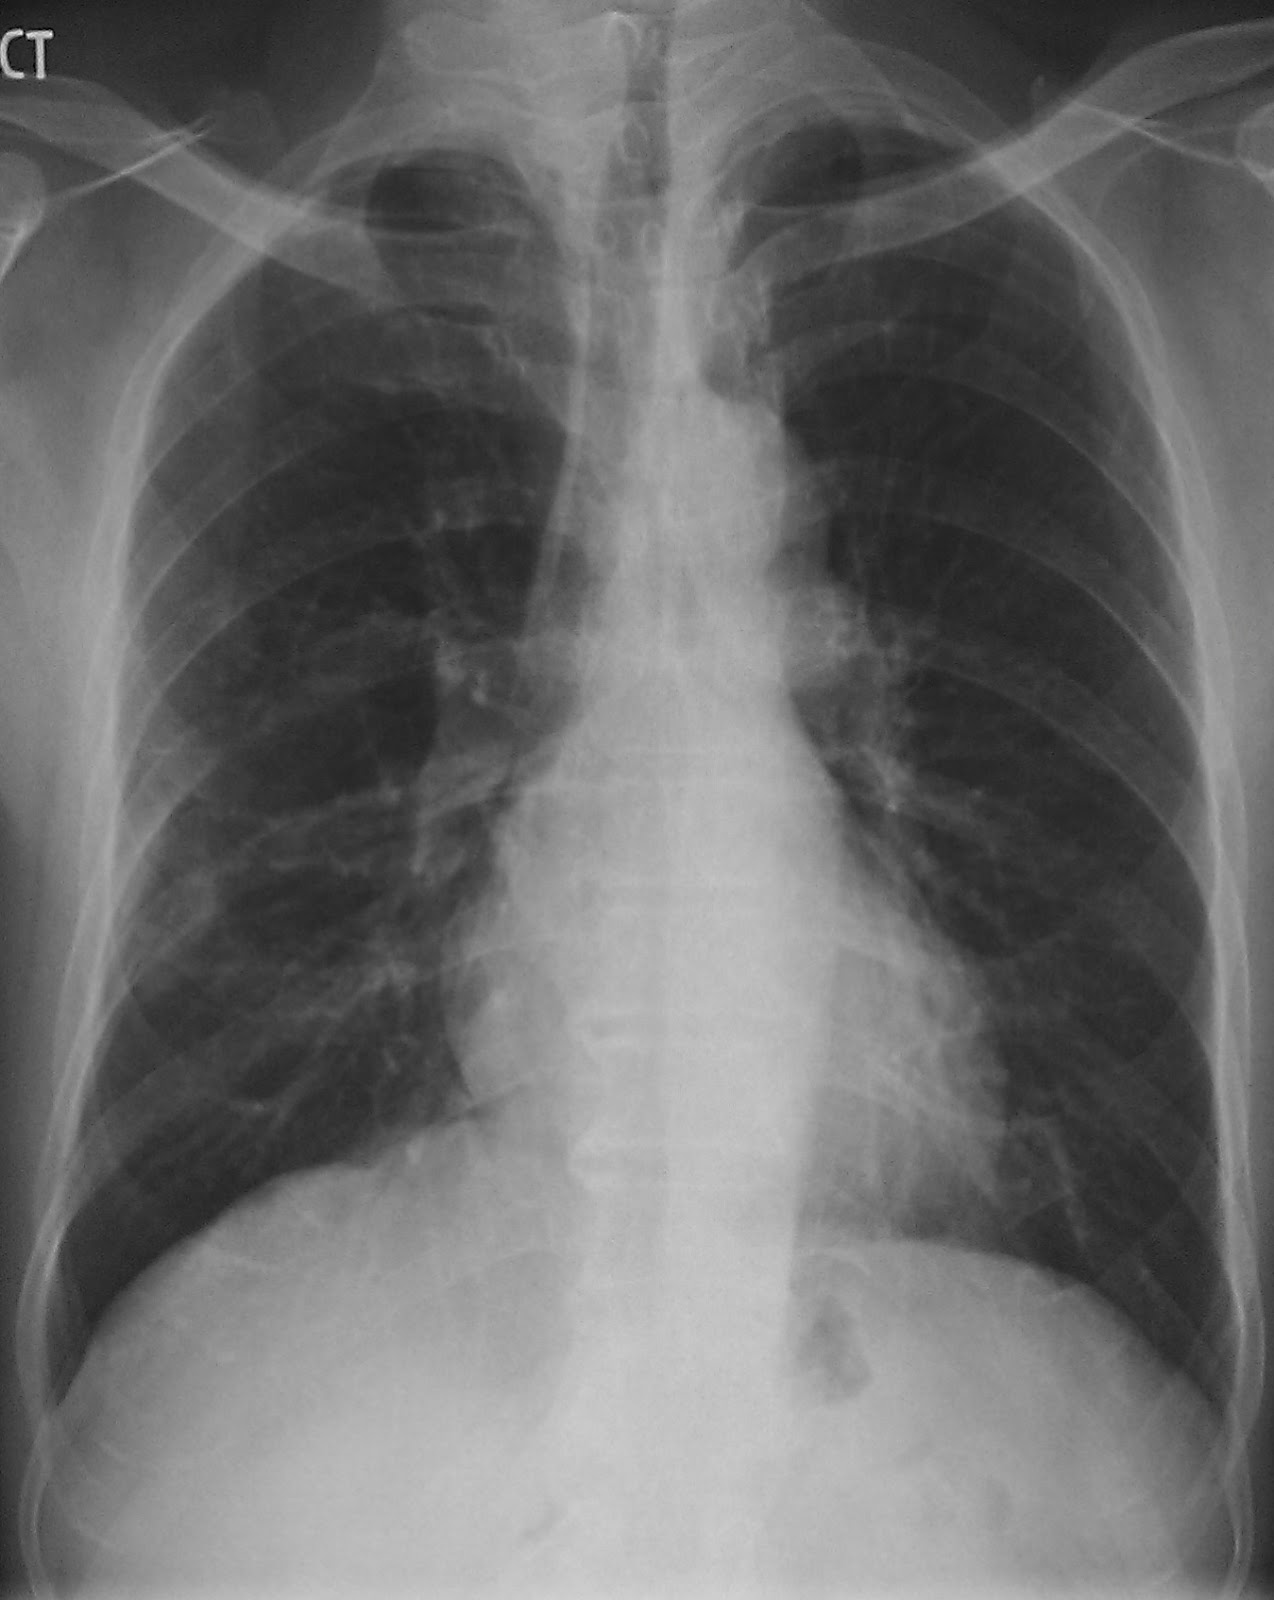 Learning Chest Radiology: Case 325  Asbestos exposure